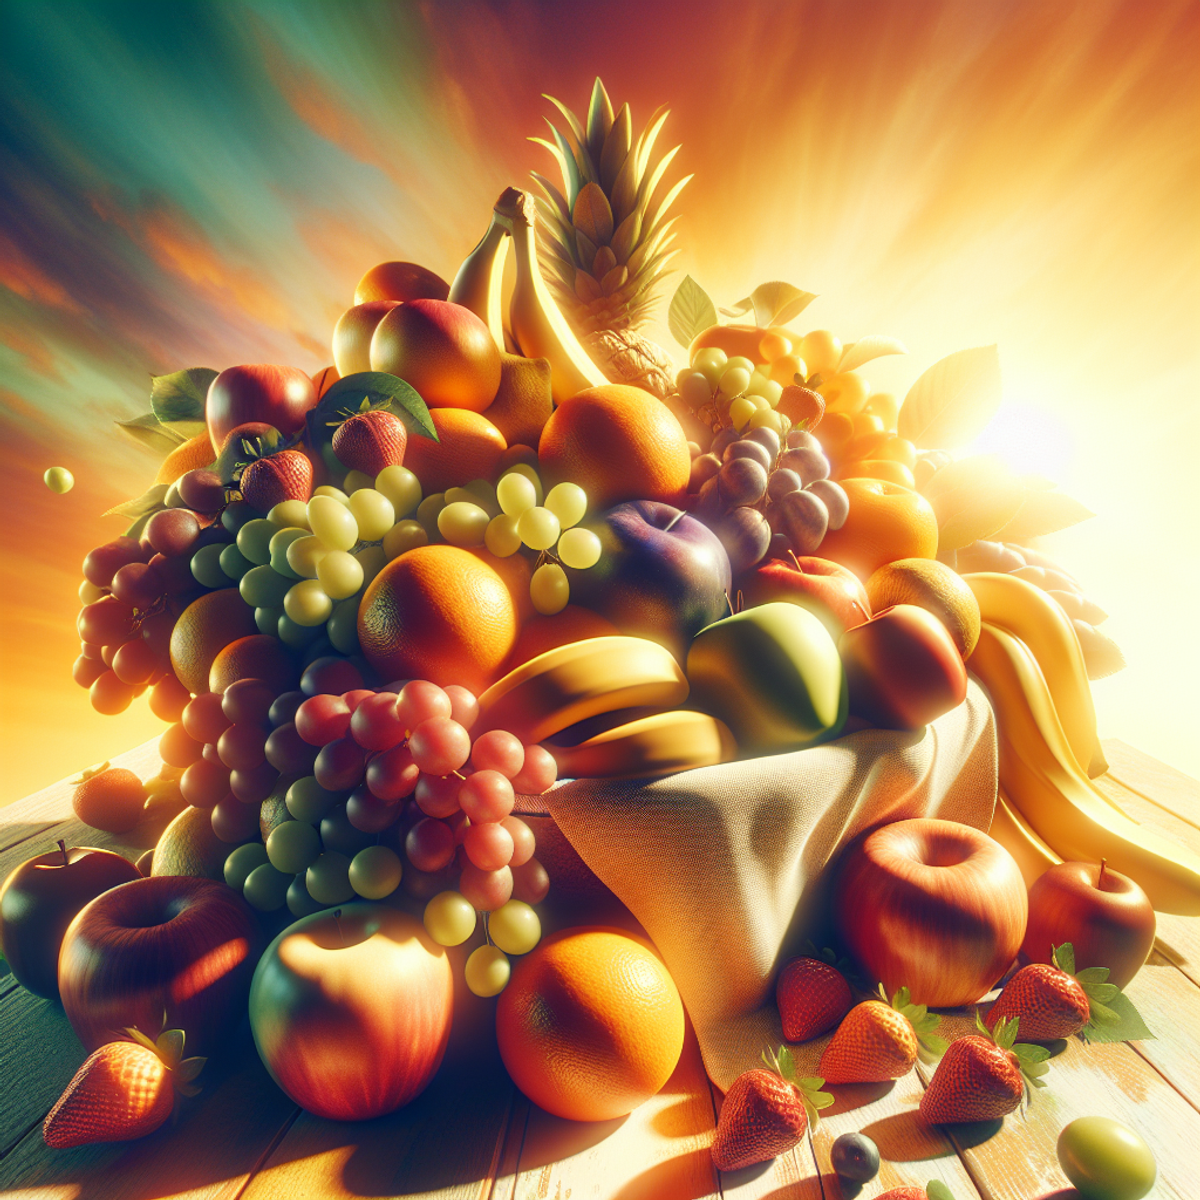 A bowl filled with oranges, bananas, apples, grapes, and strawberries illuminated by the setting sun.